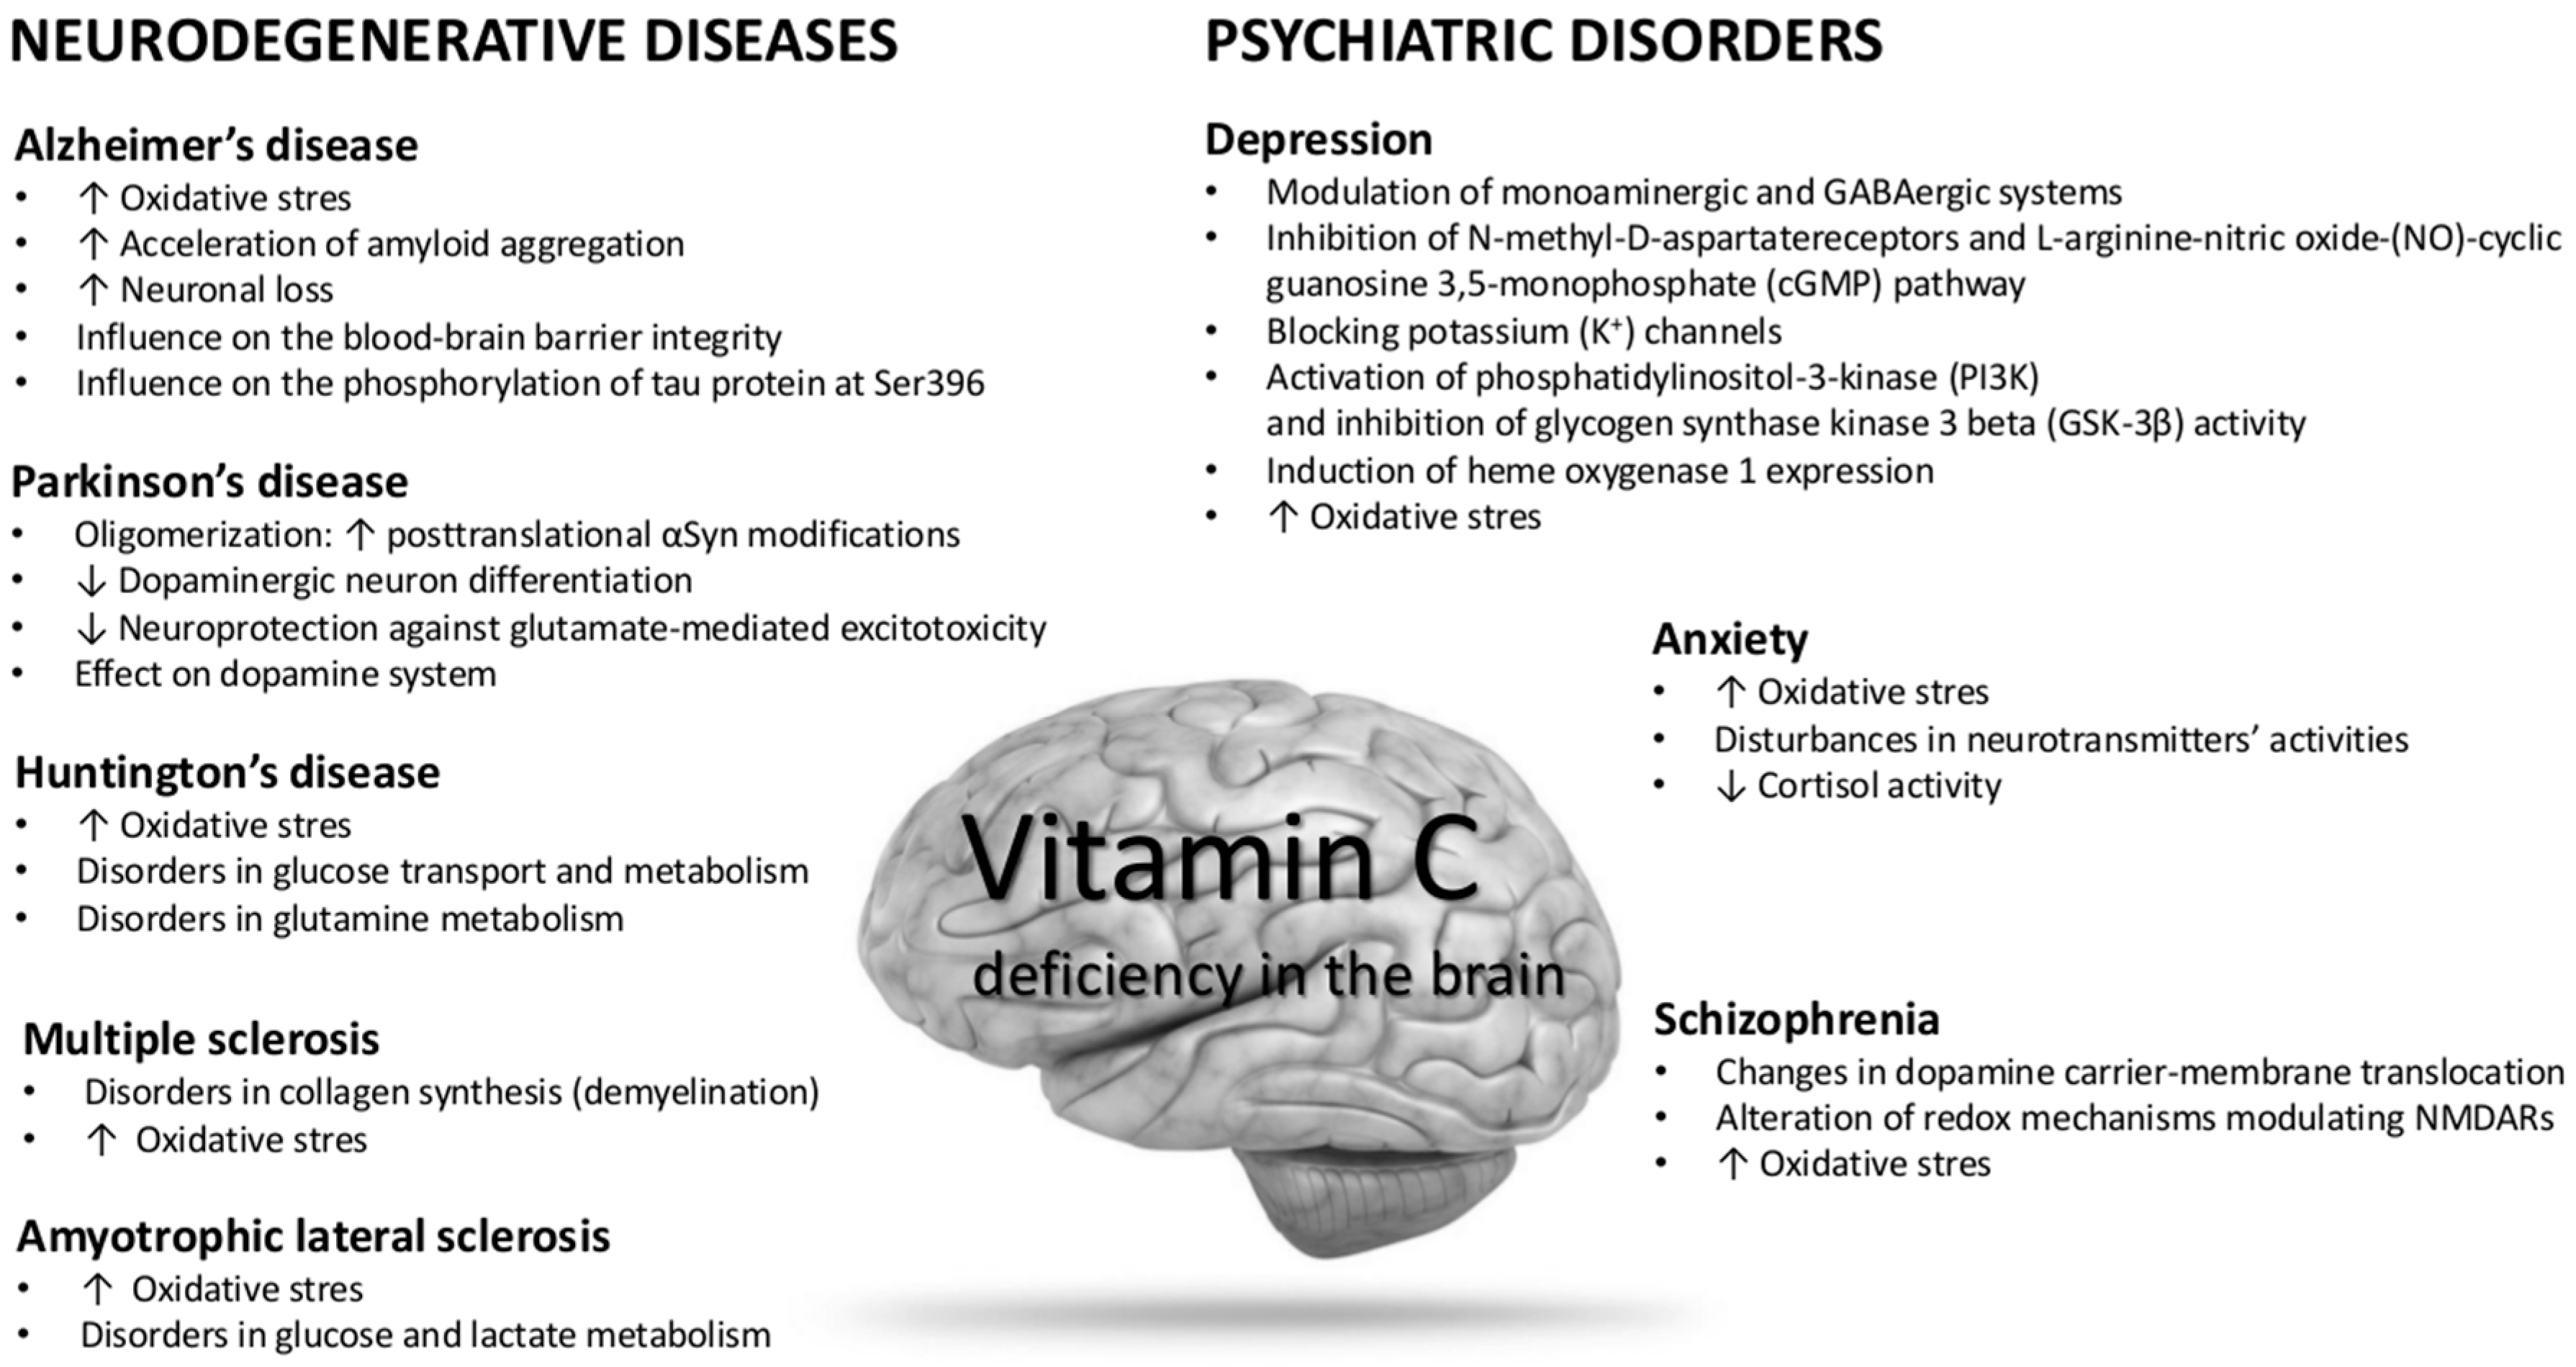 Nutrients | Free Full-Text | Does Vitamin C Influence Neurodegenerative  Diseases and Psychiatric Disorders?